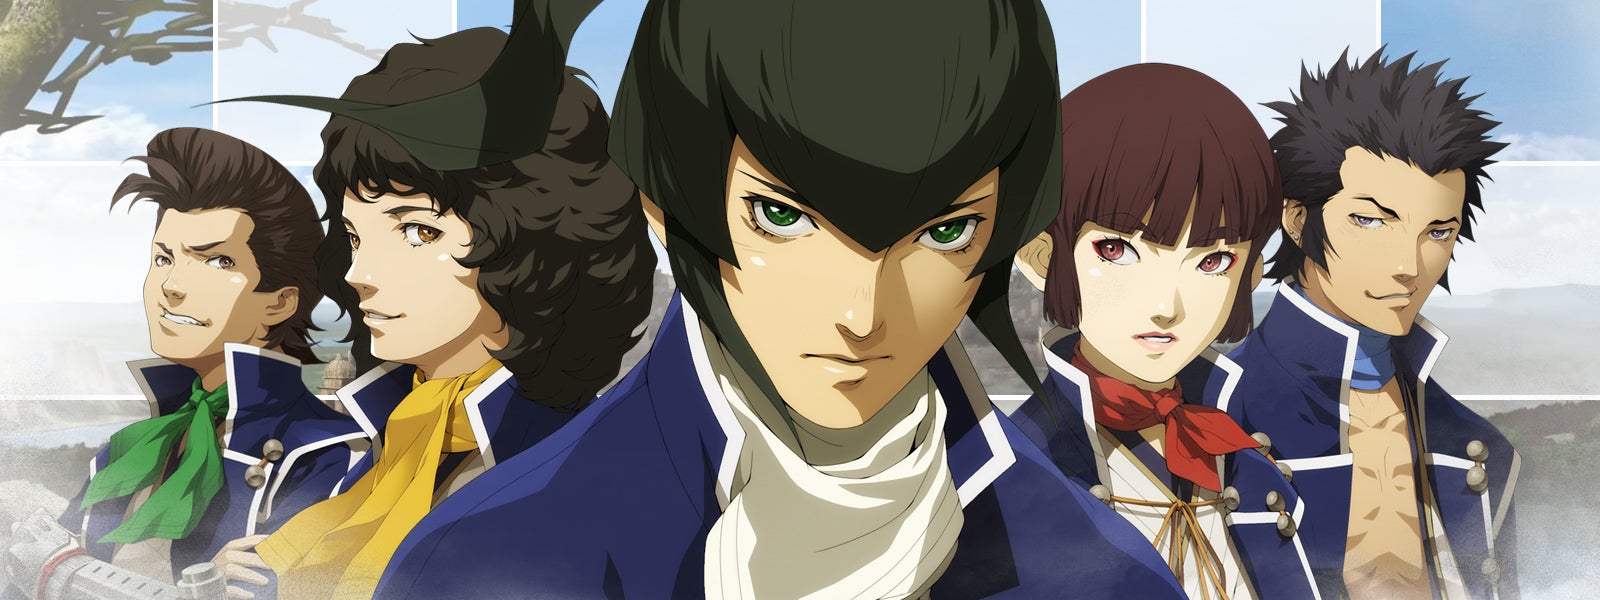 Image for Shin Megami Tensei 4 is finally arriving on the European eShop this month